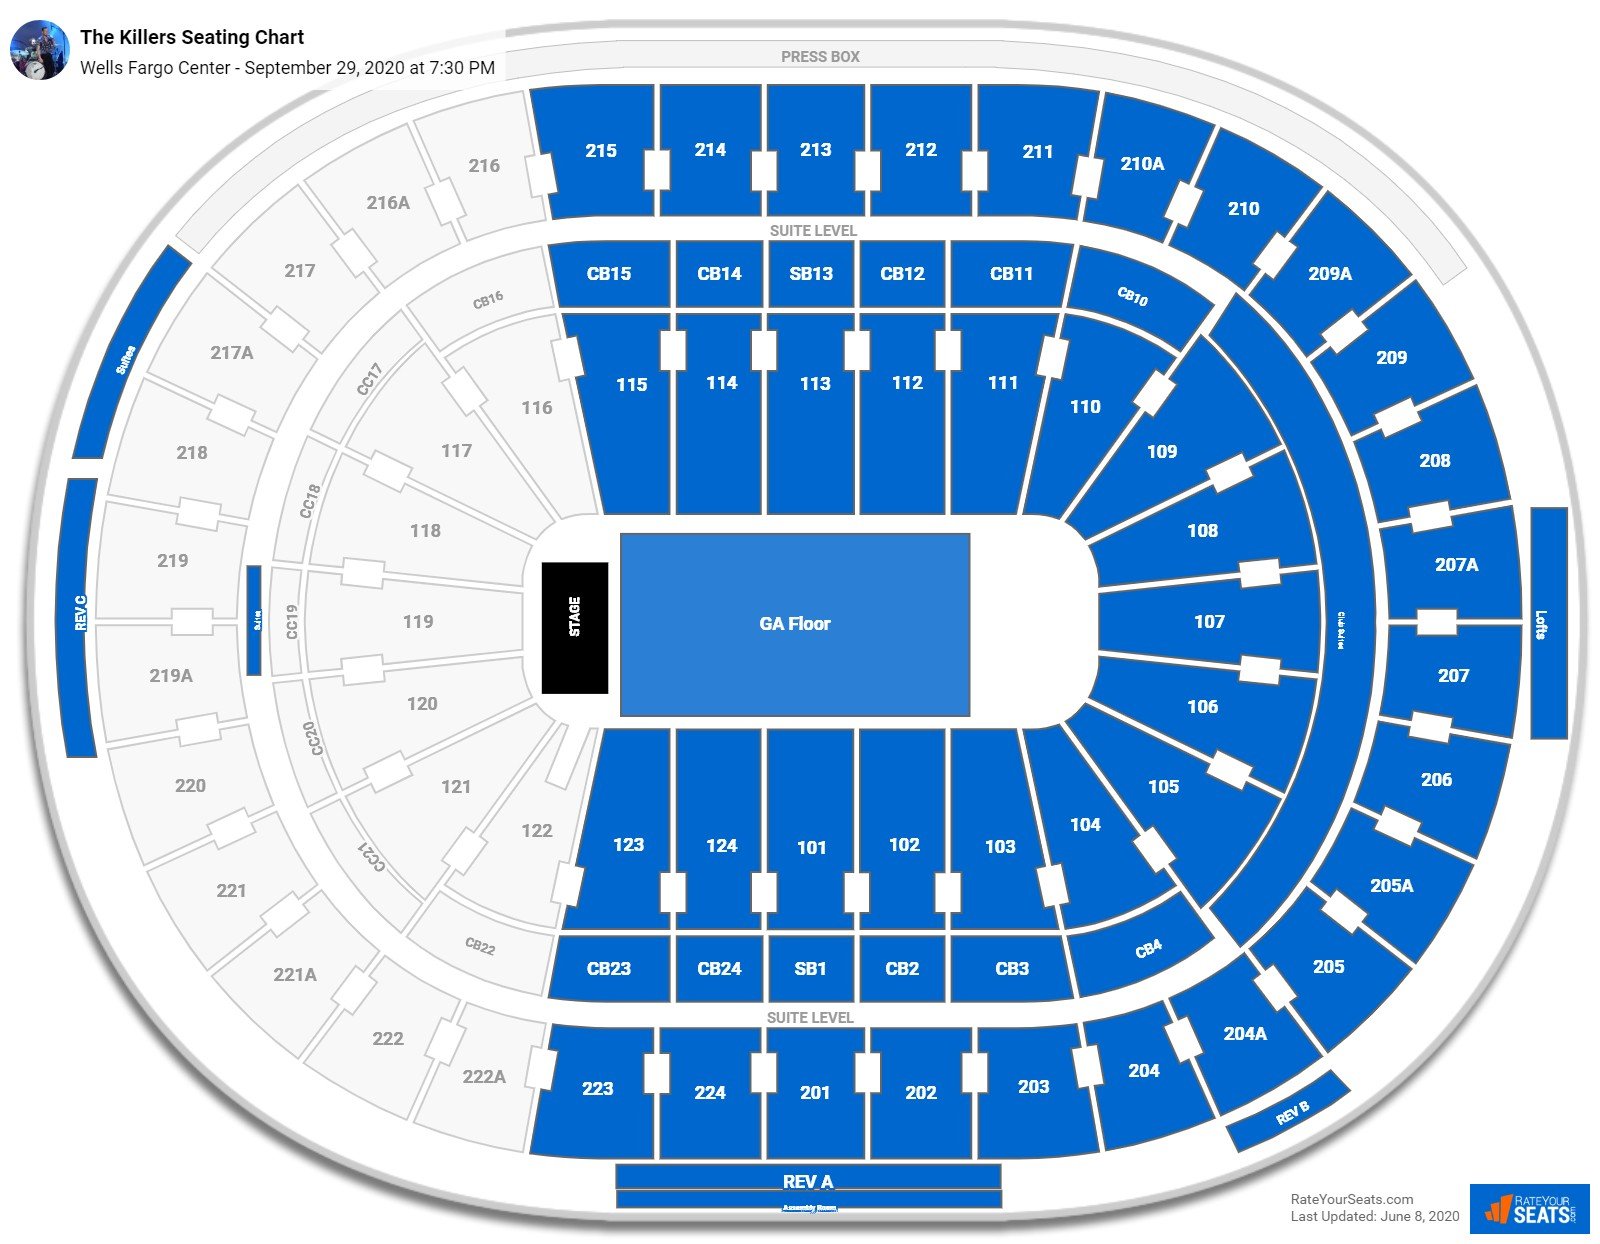 Wells Fargo Center Seating Charts for Concerts